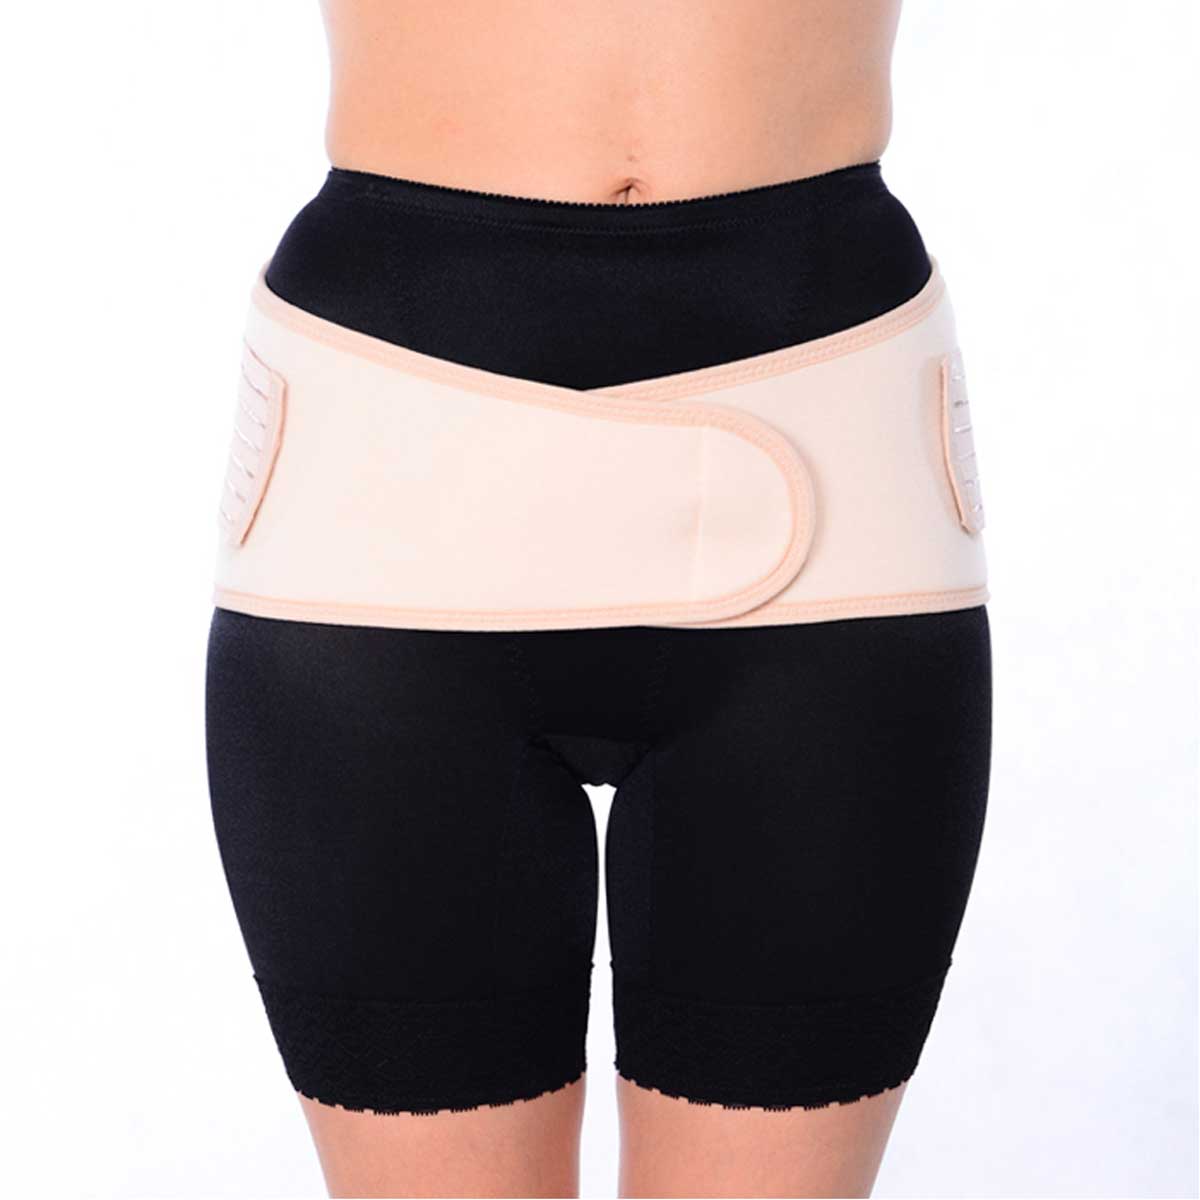 Bracoo Maternity Belt & Post Partum Waist Binder - Adjustable Belly Band  for Pregnancy - Relieve Tired Muscles, Support for Prenatal and Postpartum